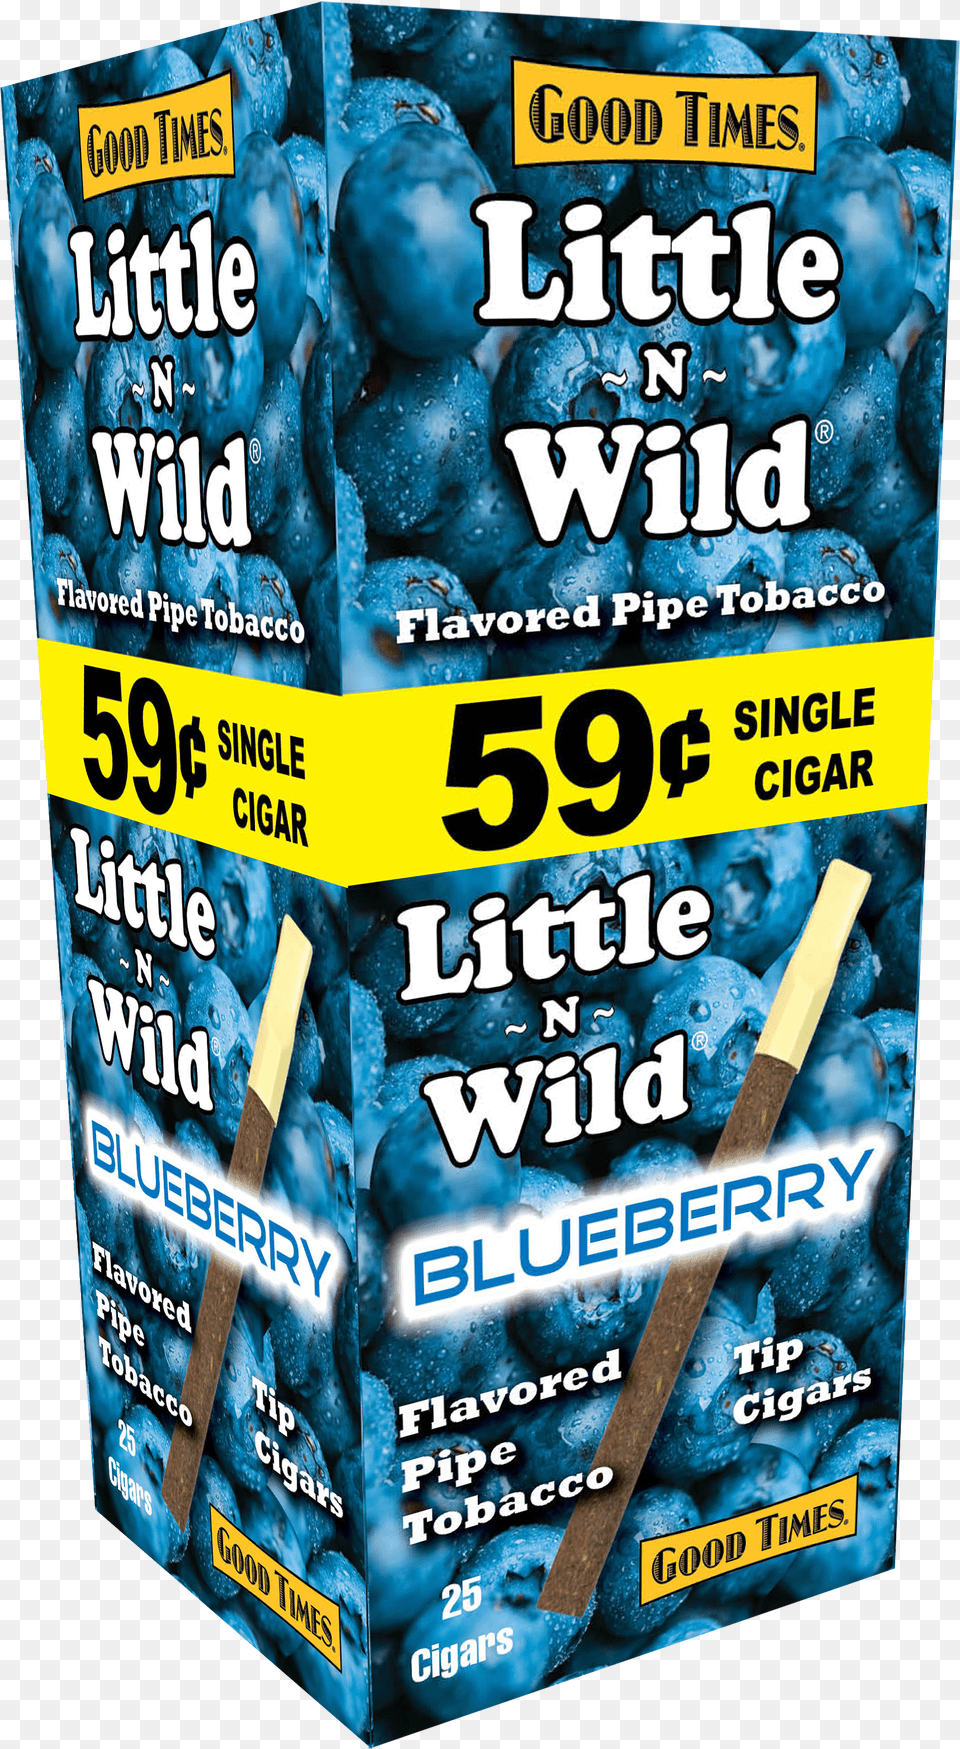 Good Times Little N Wild 0 Good Times Little N Wild Blueberry Png Image